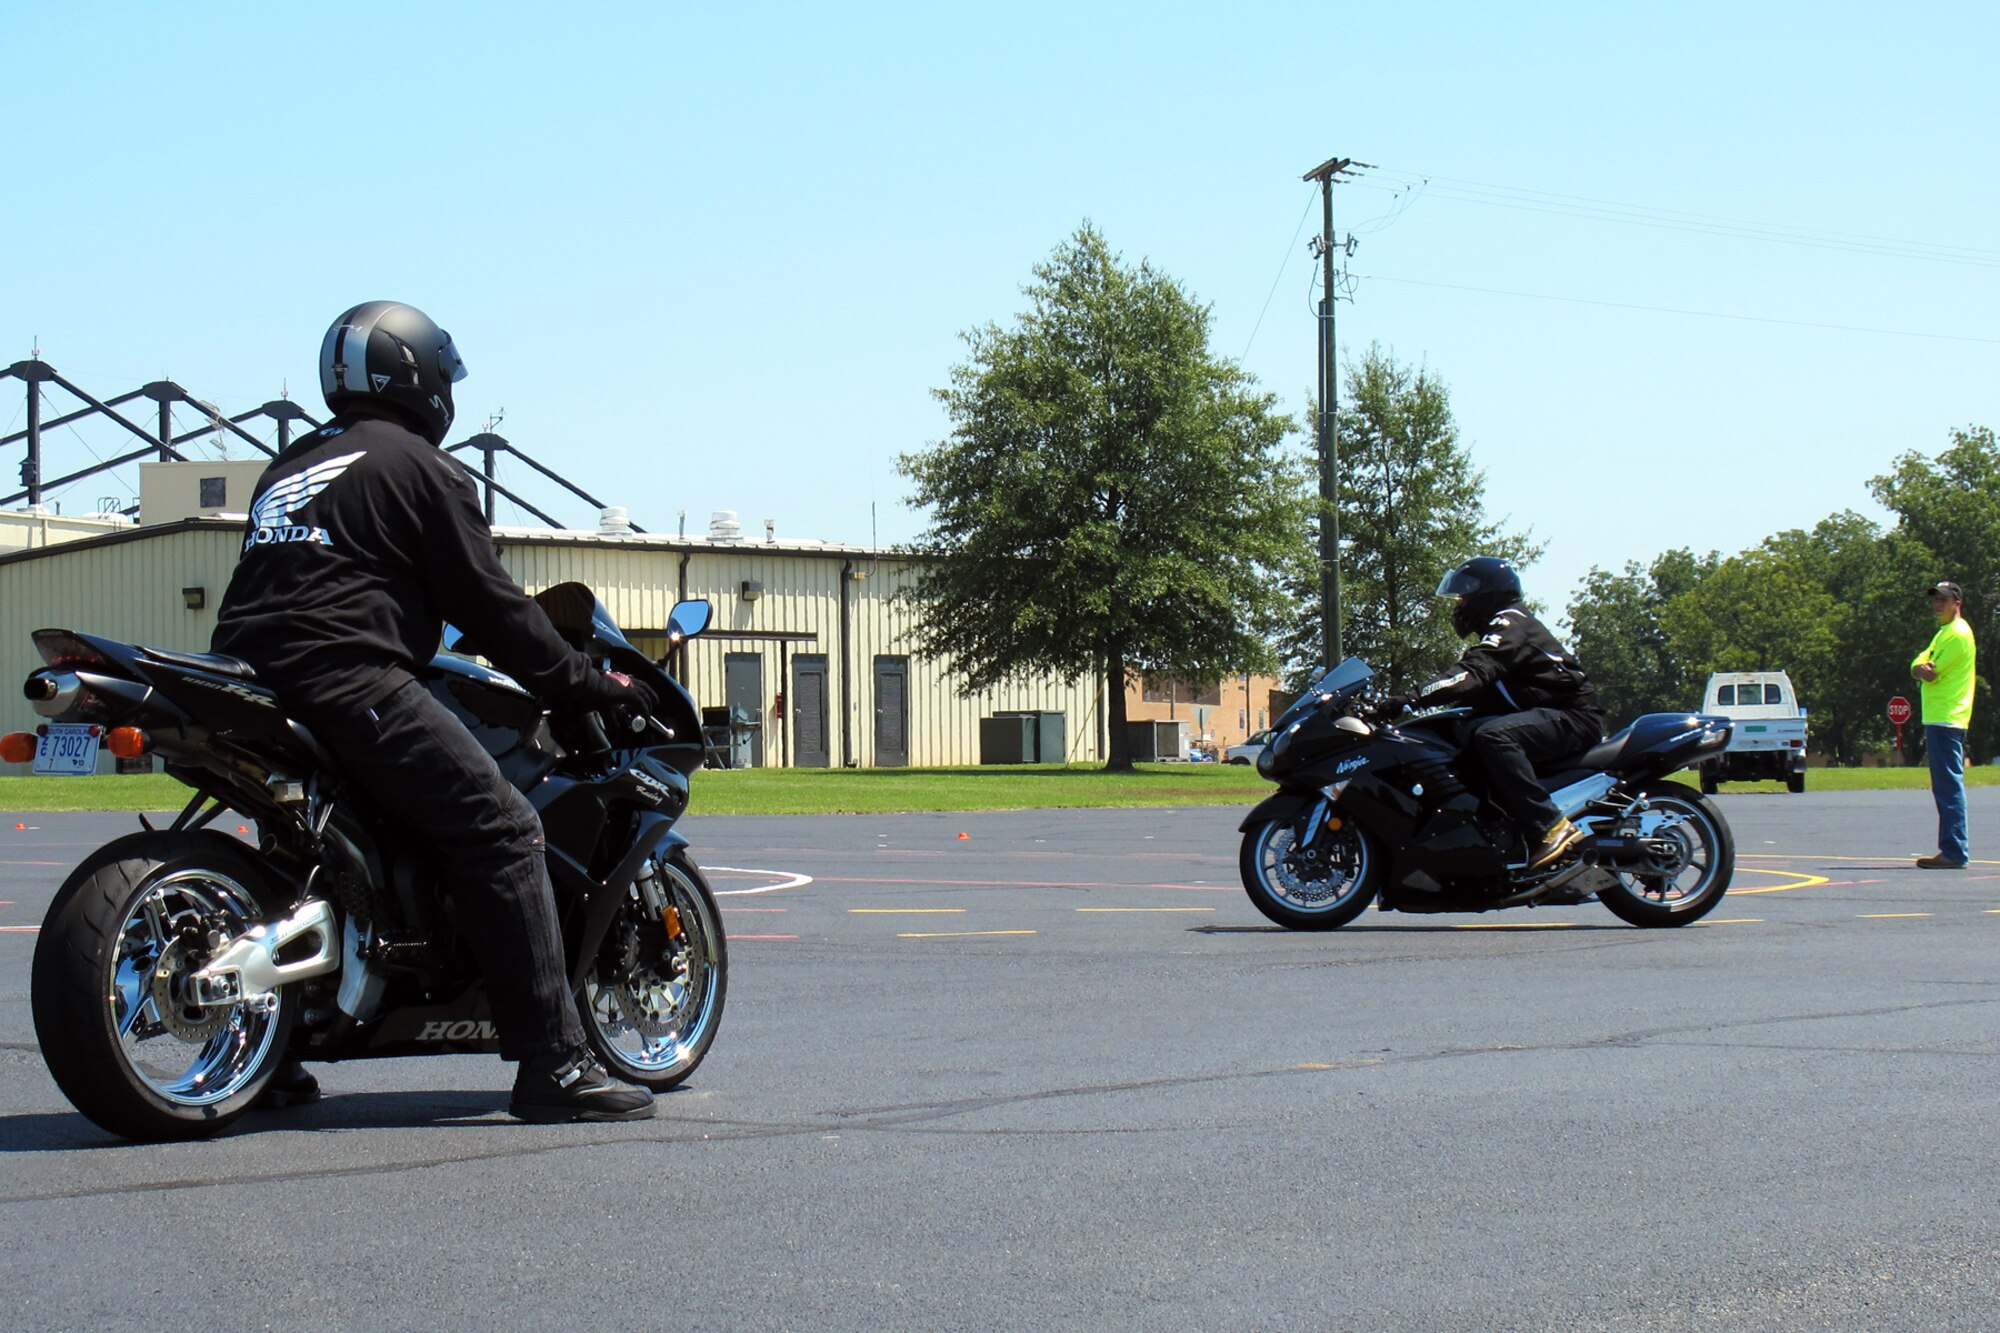 Maj. Wade Rivers and Master Sgt. Gene Croft conducted motorcycle safety training 25-26 Aug, 2012. Carolina Honda loaned two Honda motorcycles to McEntire Joint National Guard Base, S.C., to use in the Motorcycle Safety Foundation course at no cost to the base. (Photo courtesy of Zachary Rivers/Released)